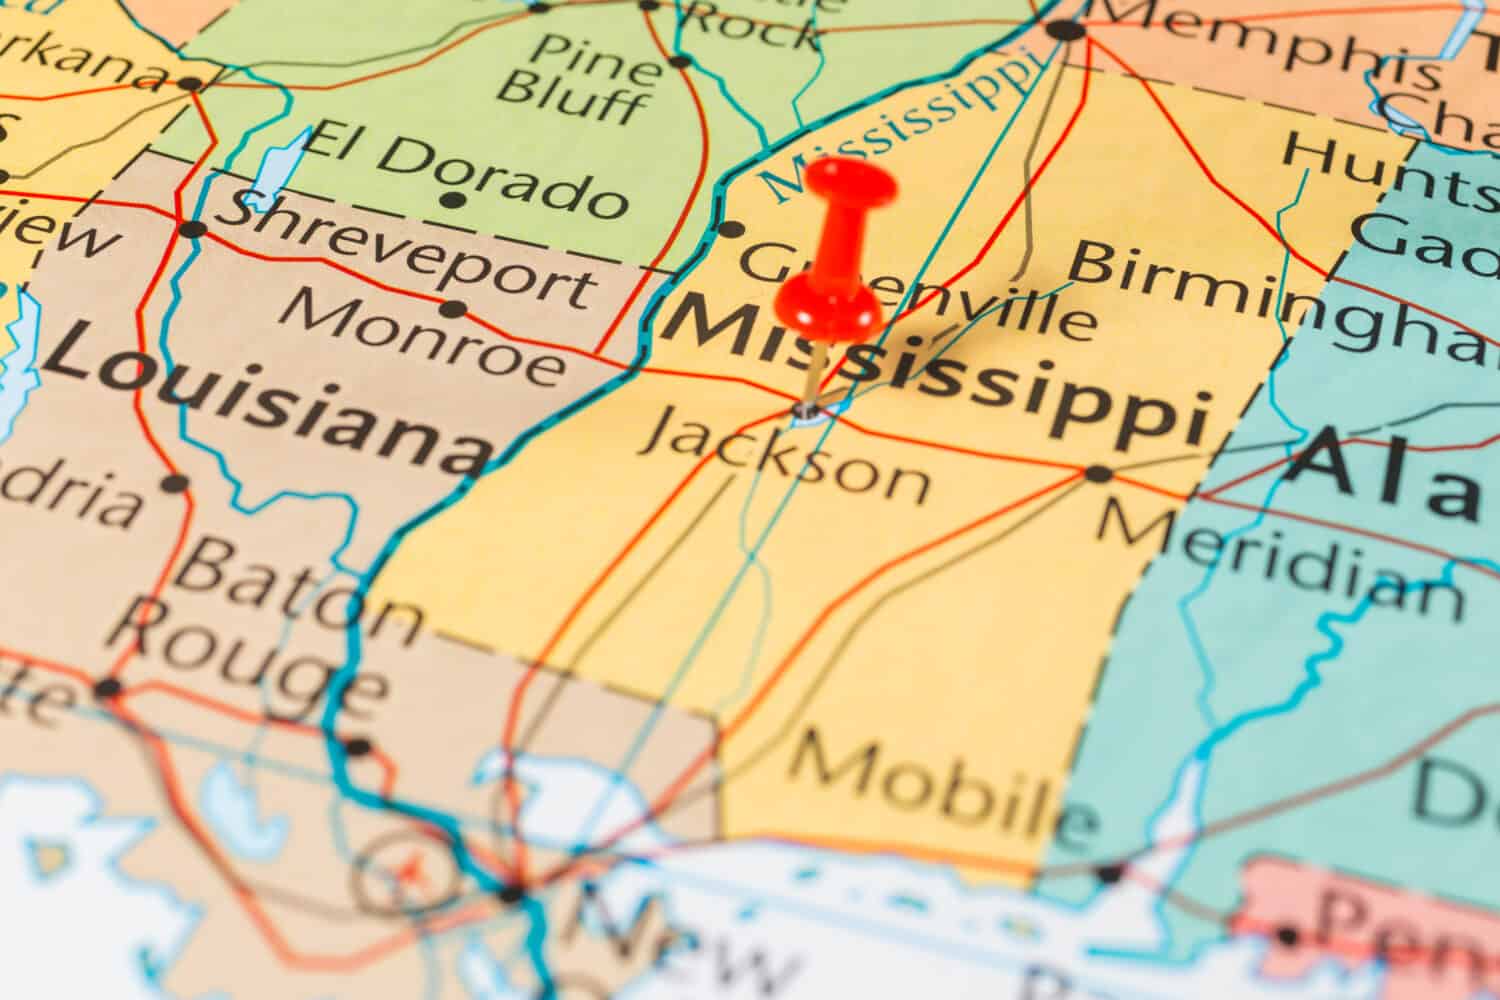 Mississippi on the map of United States